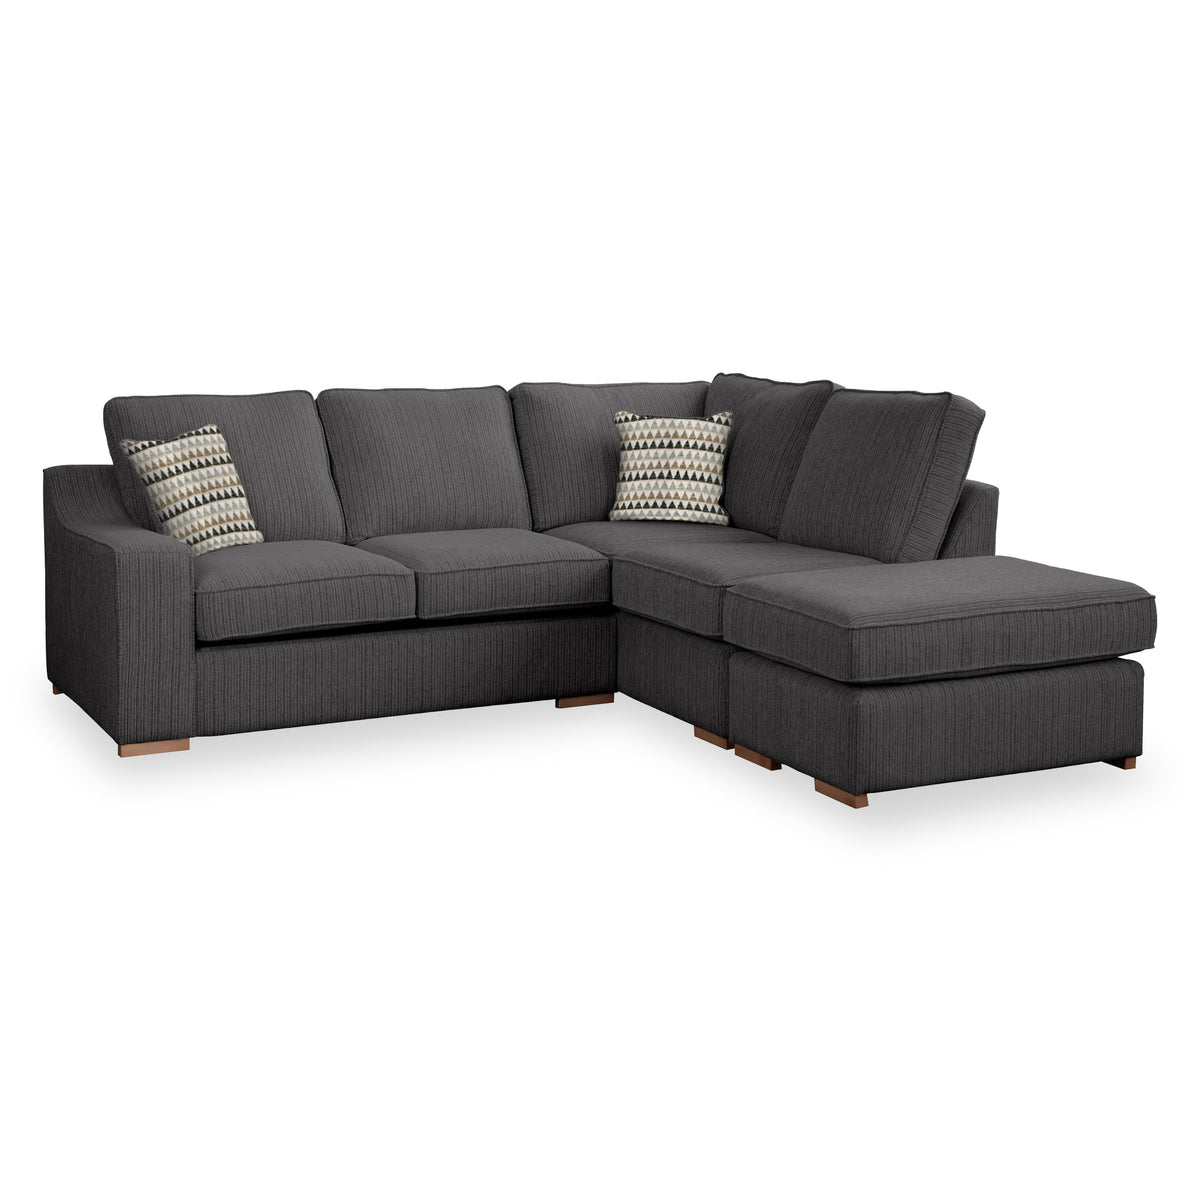 Ashow Charcoal Right Hand Corner Sofabed with Maika Beige Scatter Cushions from Roseland furniture